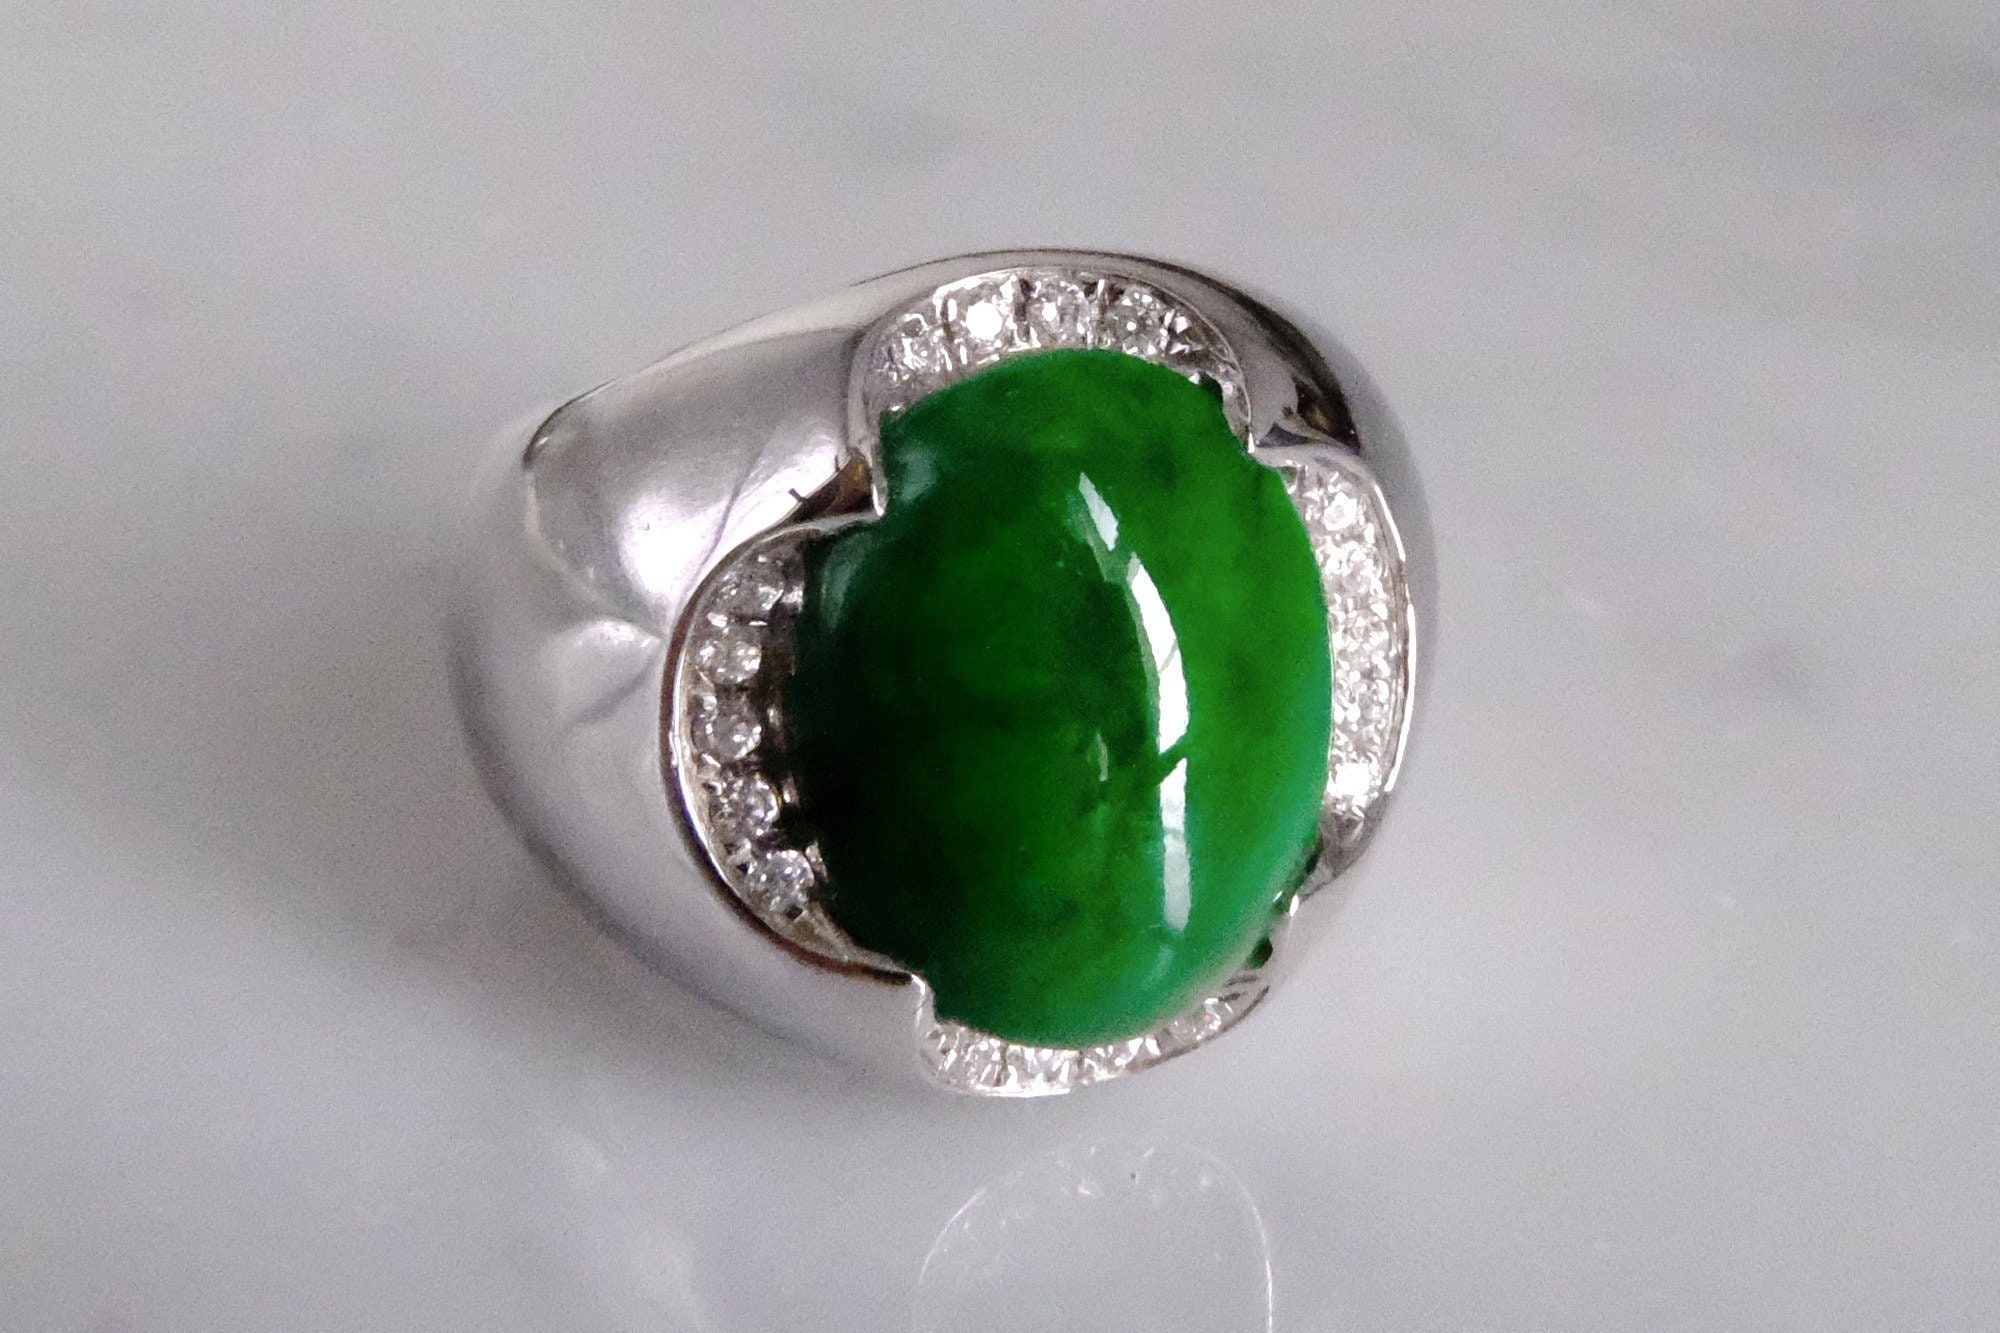 Elegant Oval Green Jade Emerald Diamond Rings For Women White Gold Silver  Color Bague Fine Gemstone Rings, Fashionable Gift Band From Shuiyan168,  $26.09 | DHgate.Com